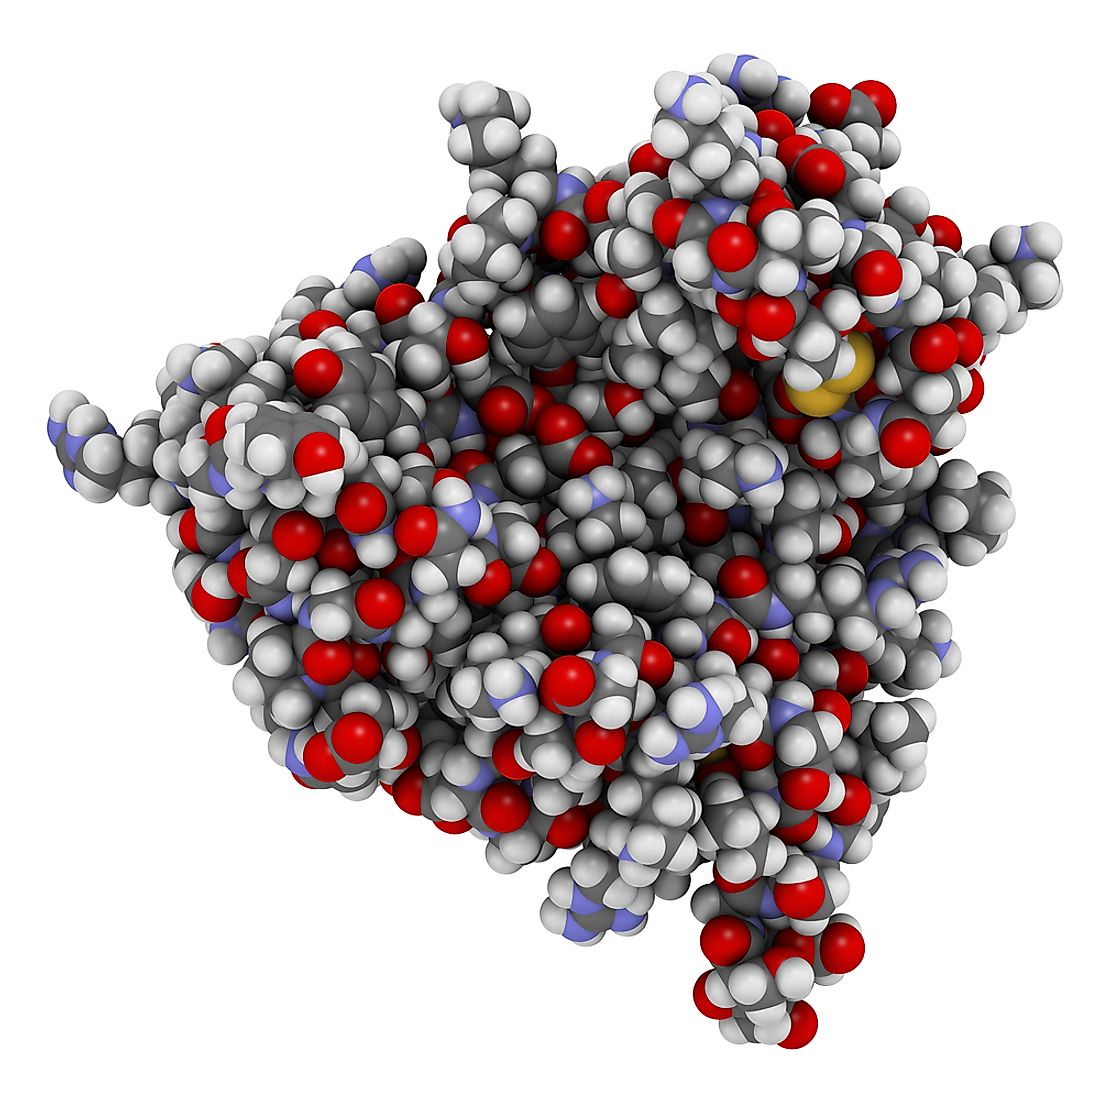 A 3D rendering of the protein Thaumatin, the sweetest substance in the world. 